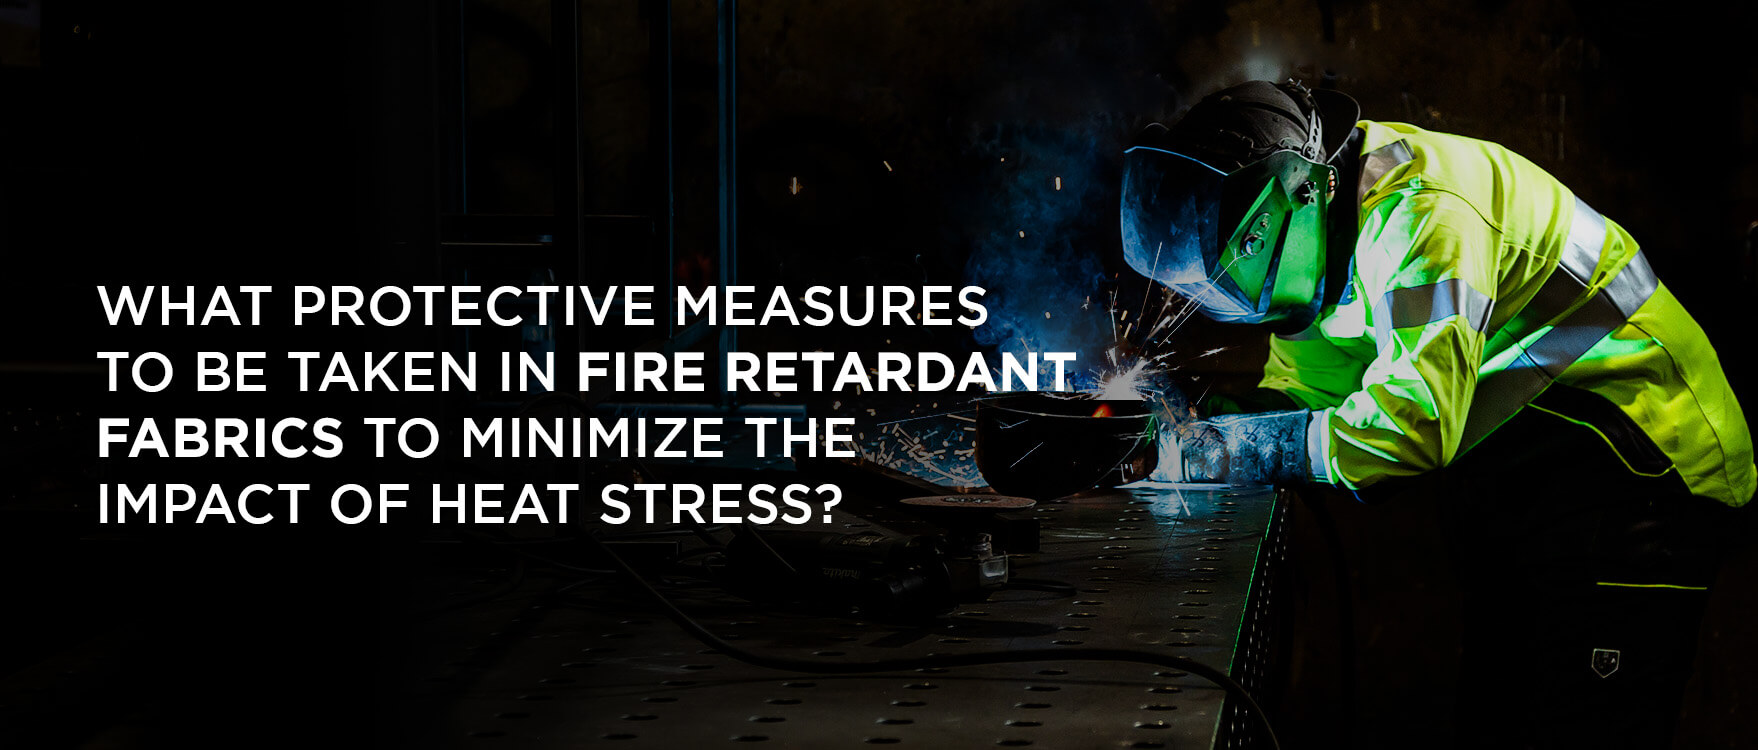 What protective measures to be taken in fire retardant fabrics to minimize  the impact of heat stress?